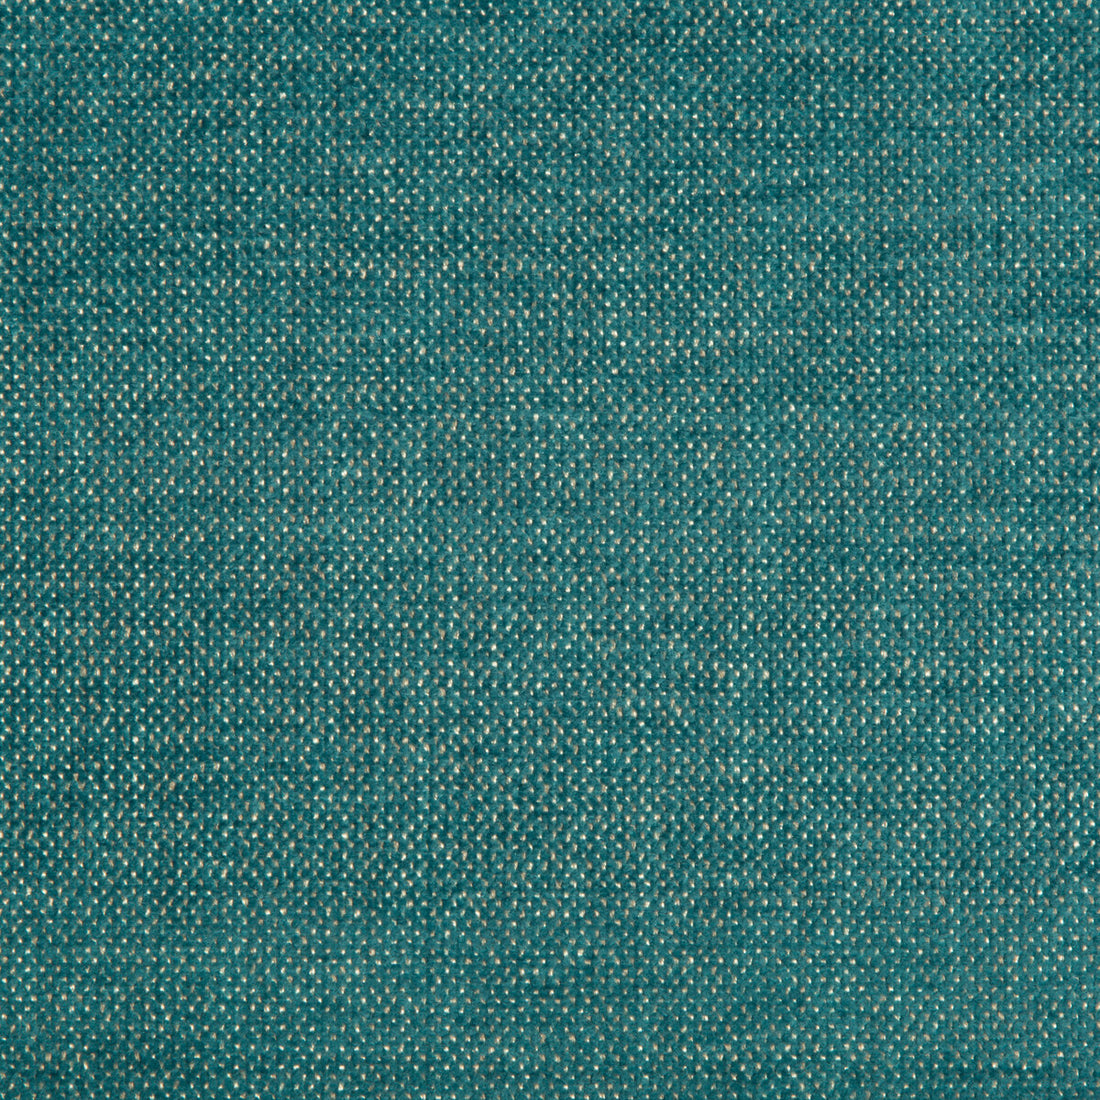 Kravet Smart fabric in 35393-35 color - pattern 35393.35.0 - by Kravet Smart in the Performance Crypton Home collection